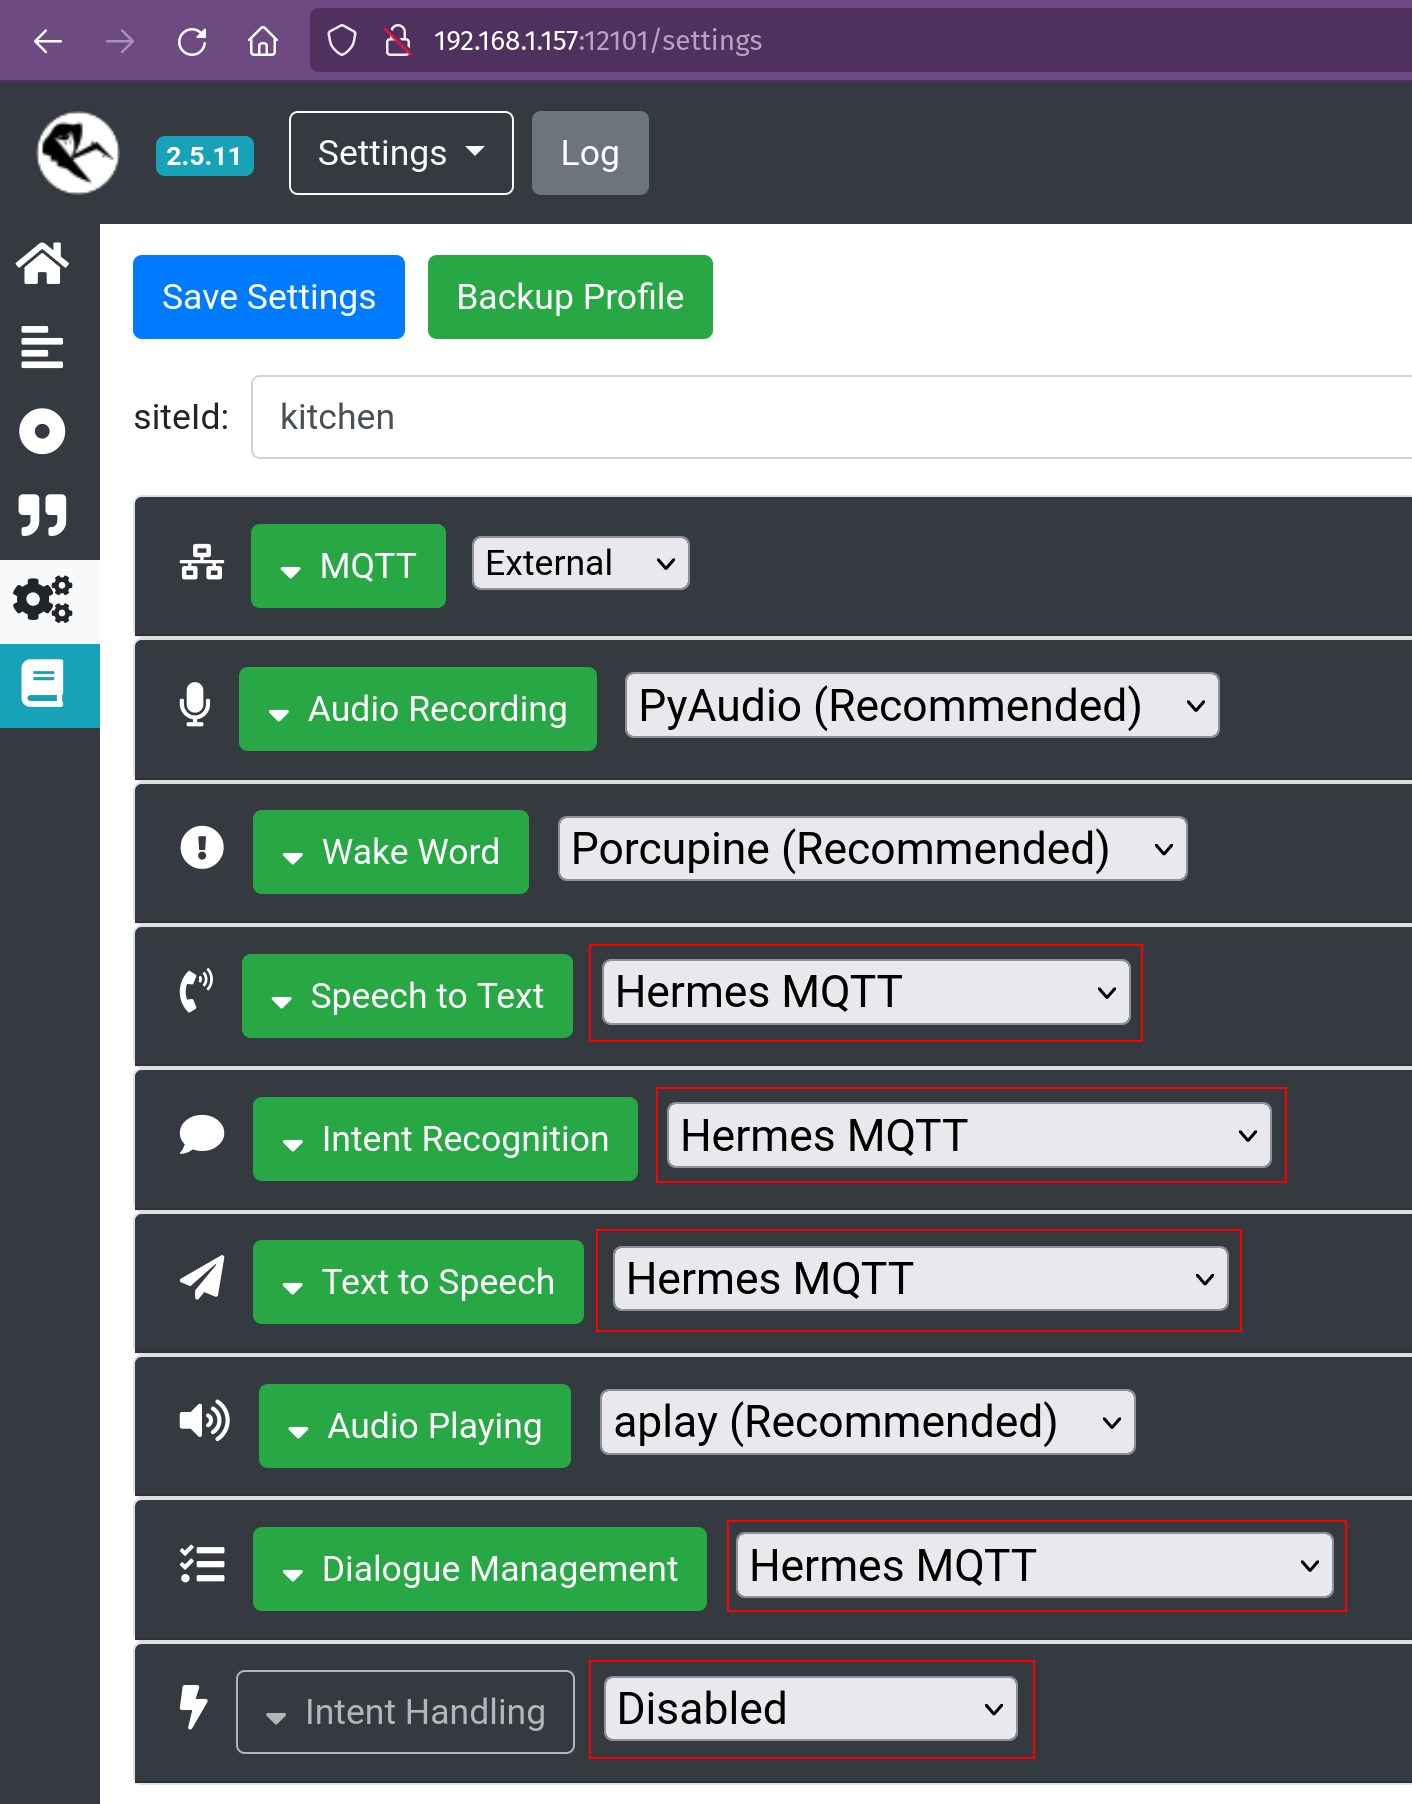 the rest of the Rhasspy Settings set to Hermes MQTT and Intent Handling set to disabled